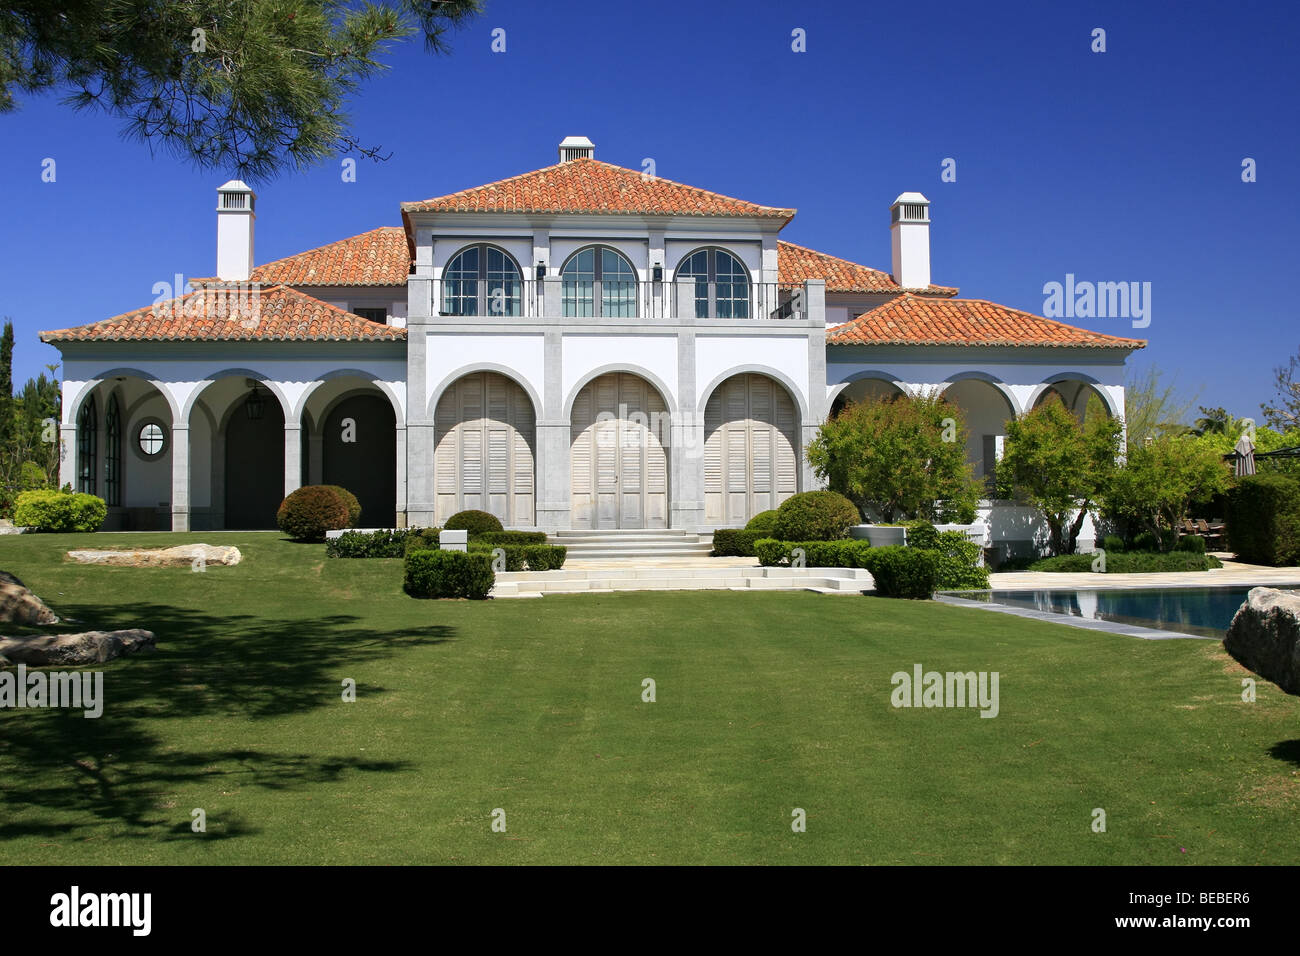 A modern and luxurious residence - Lifestyle concept Stock Photo